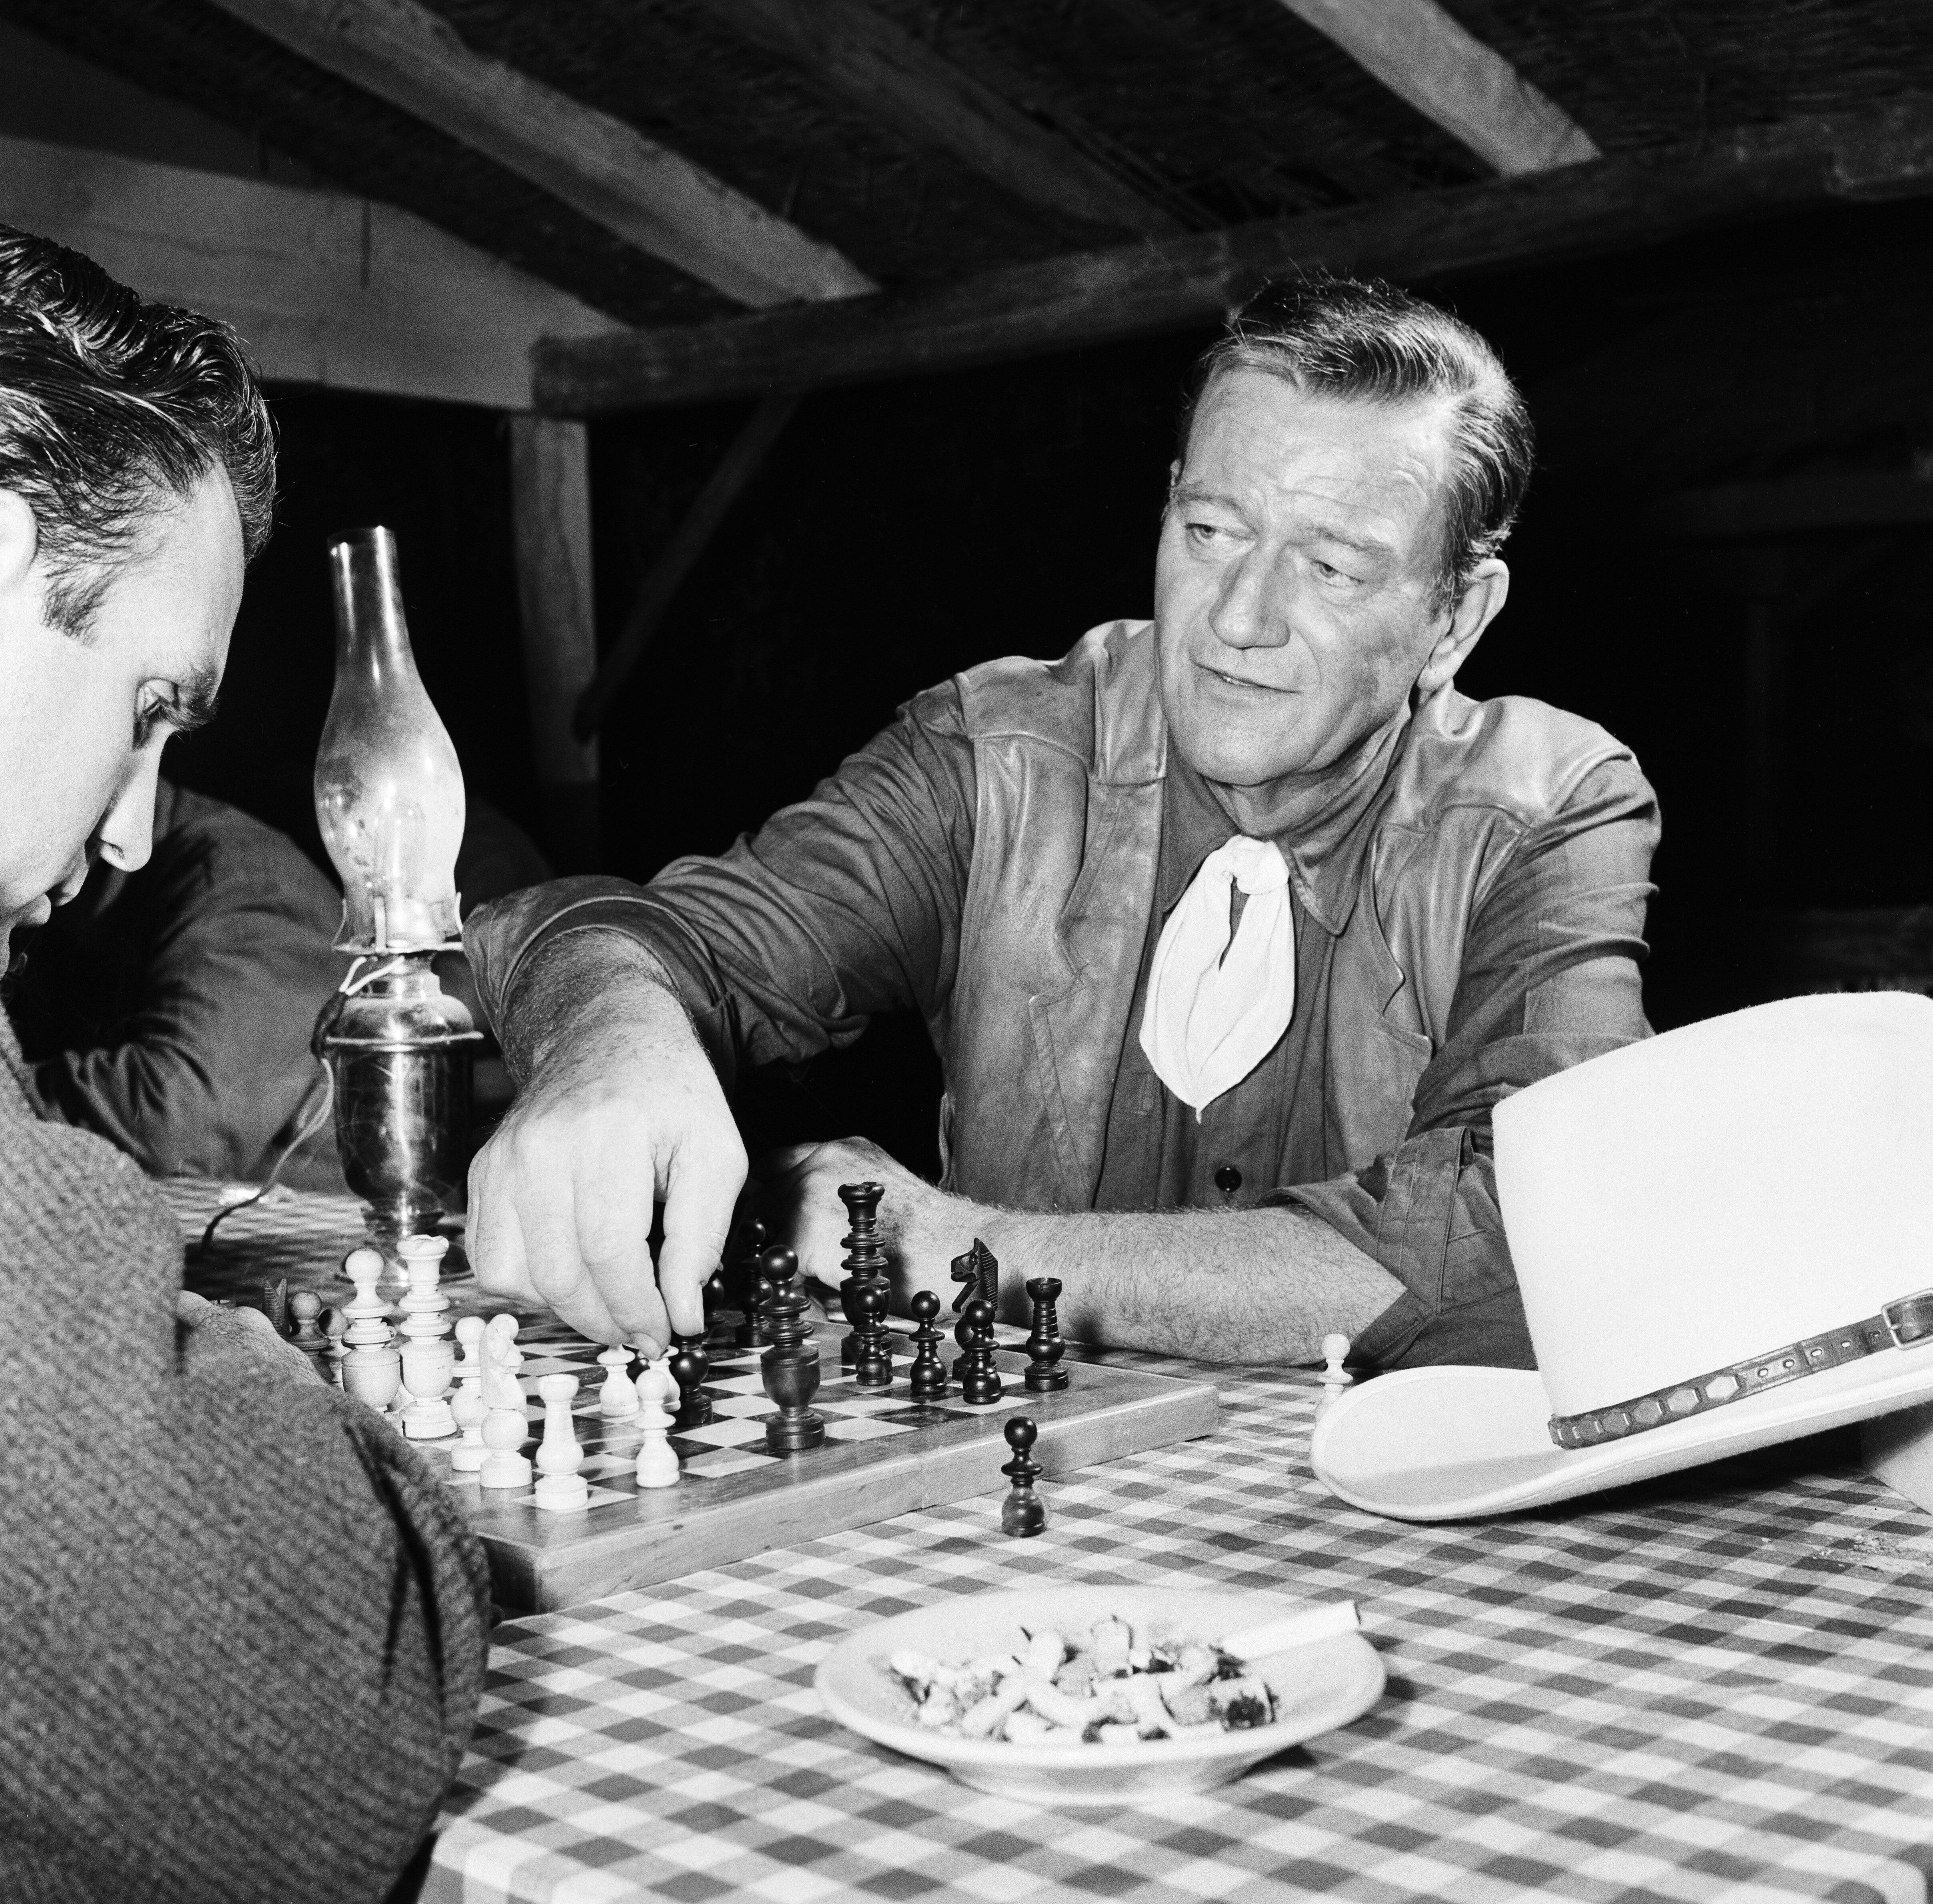 John Wayne on the set of the film "Circus World" at the Bronston Film Studios enjoying a game of chess between shots in 1963 in Madrid, Spain | Photo: Arthur Sidey/Mirrorpix/Mirrorpix via Getty Images